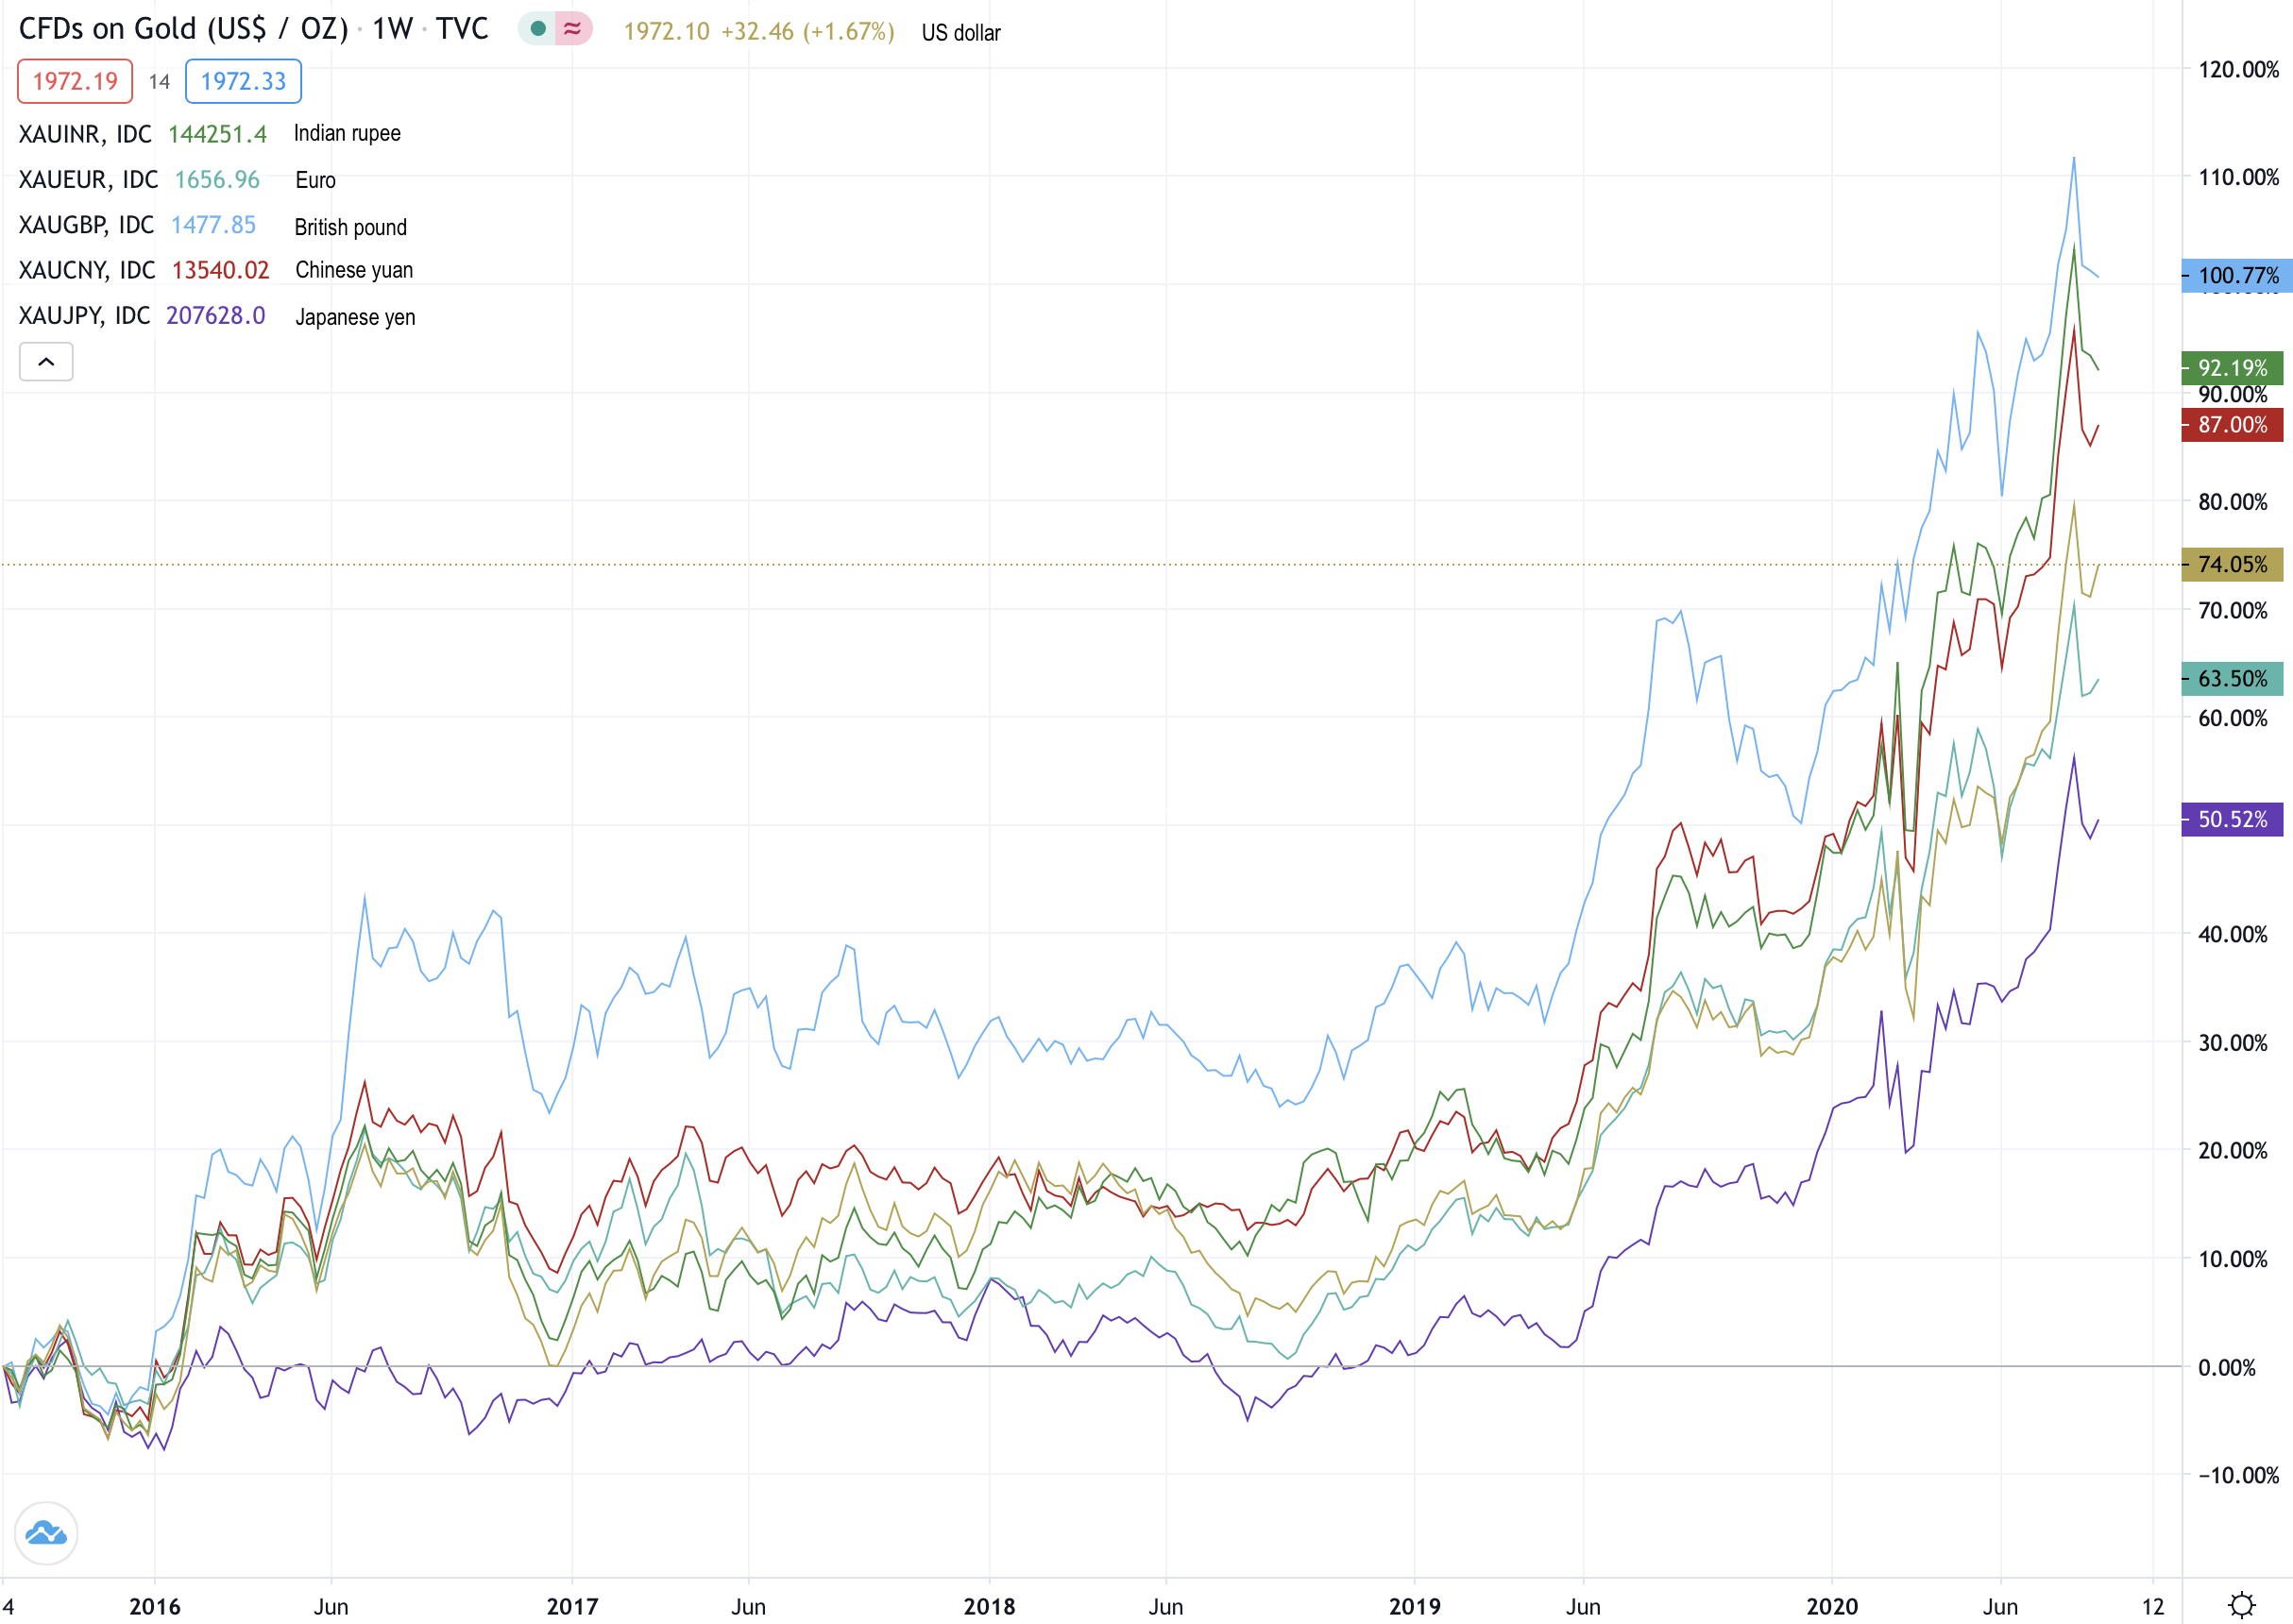 Gold in six major currencies as of 8-28-2020